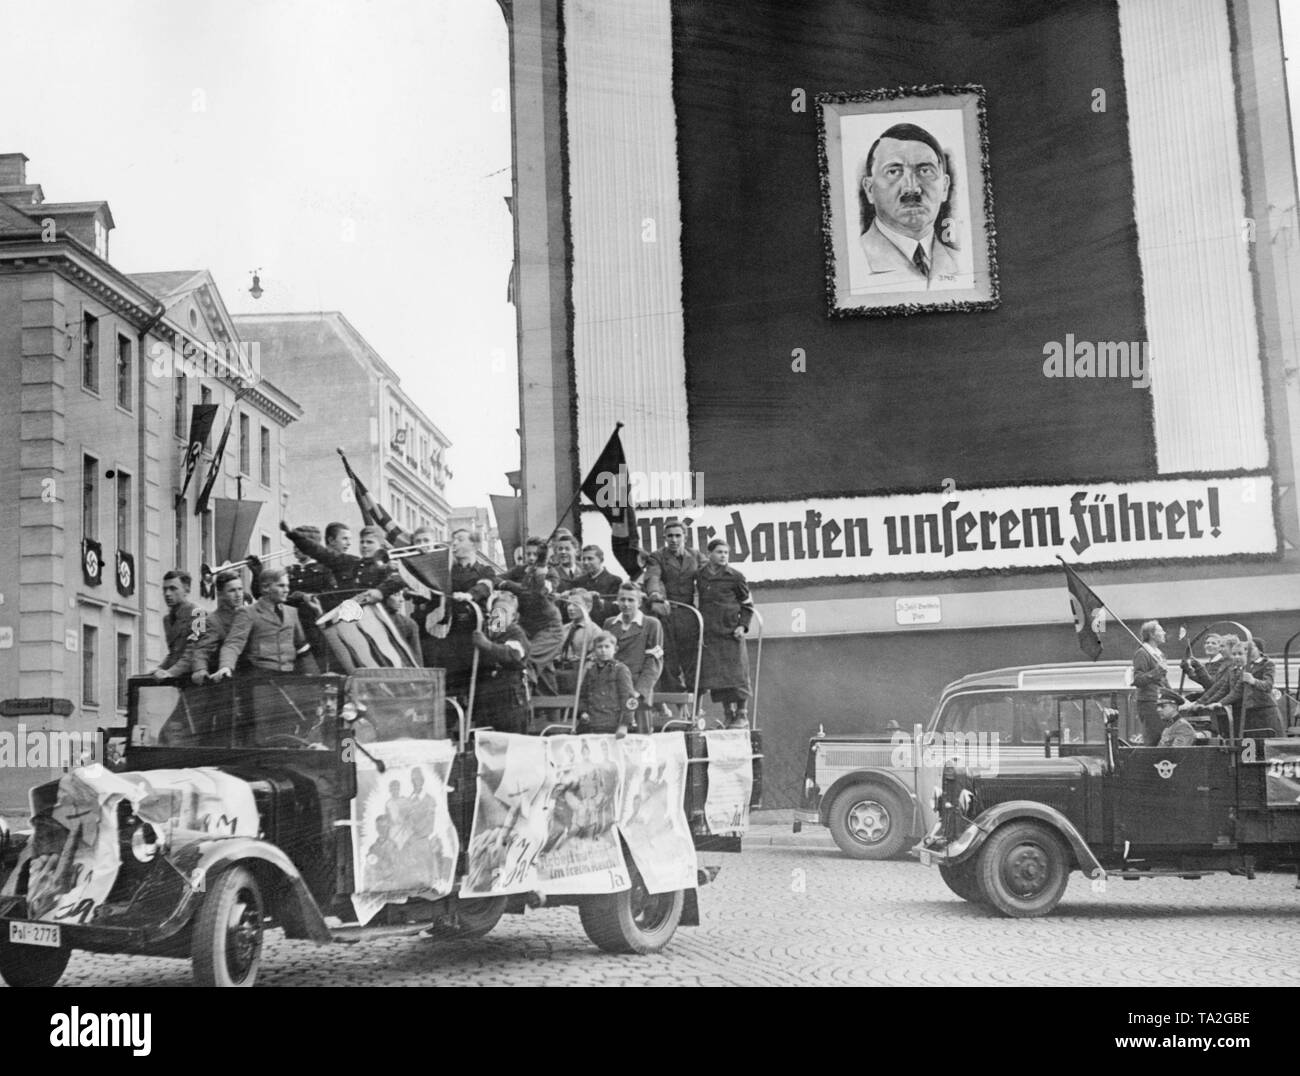 Trucks with members of the Deutsches Jungvolk (German Youth) drive through the street of a Sudeten German city. Election posters are attached to the truck. In the Sudeten German by-elections, votes are being cast concerning the annexation of the Sudetenland to the German Reich. In the background, a poster with a portrait of Adolf Hitler. Subtitle: 'We thank our Fuehrer!'. Stock Photo